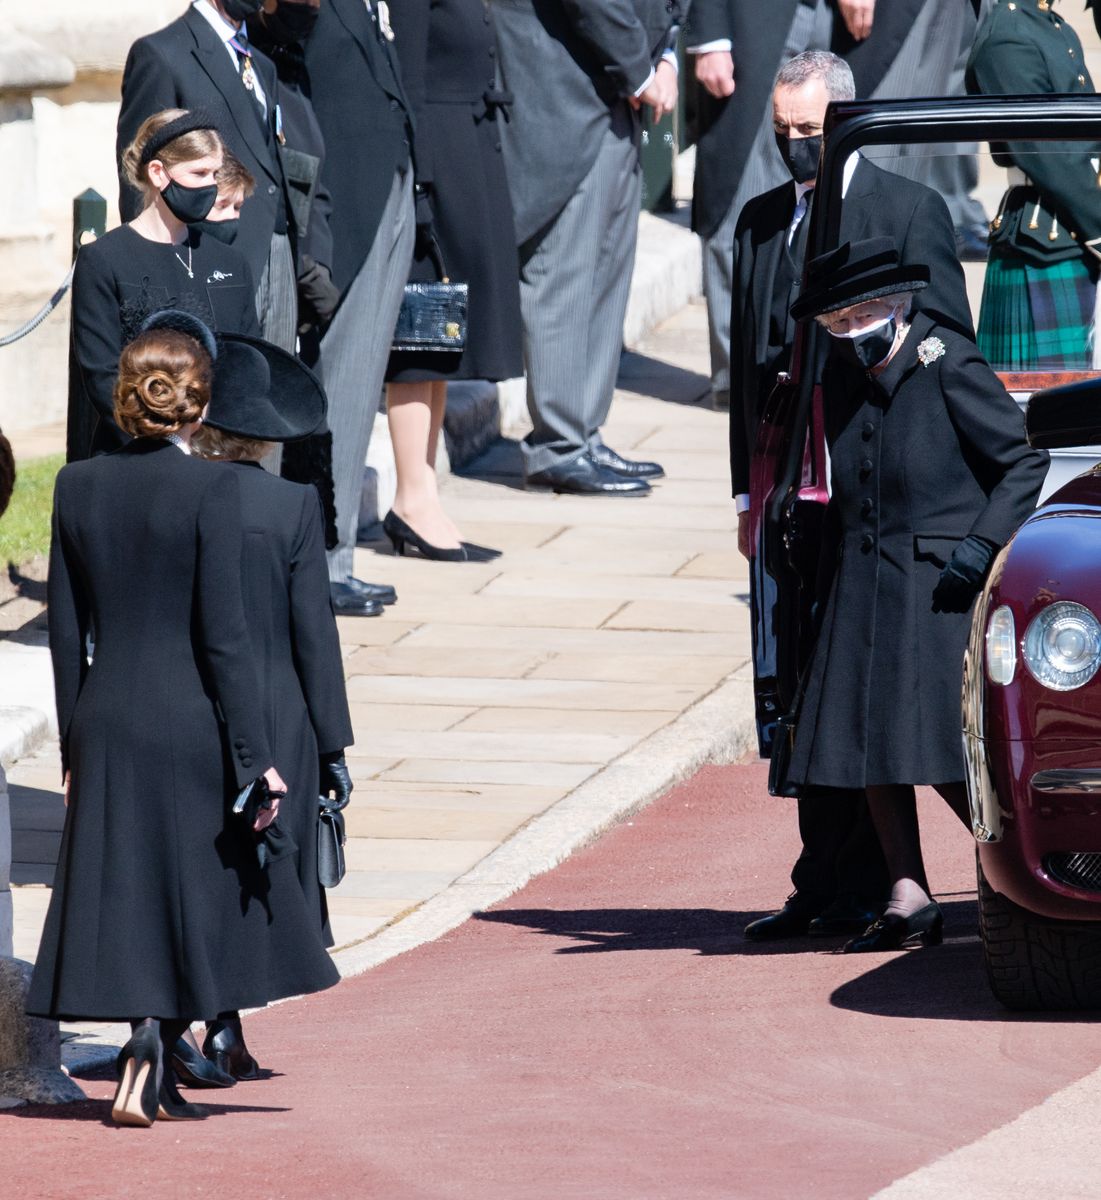 <p>Kate dips into a low bow as Queen Elizabeth exits her car to enter the <a href="https://www.harpersbazaar.com/celebrity/latest/g36146426/prince-philip-funeral-photos/">funeral</a> of her late husband, Prince Philip, Duke of Edinburgh.</p>